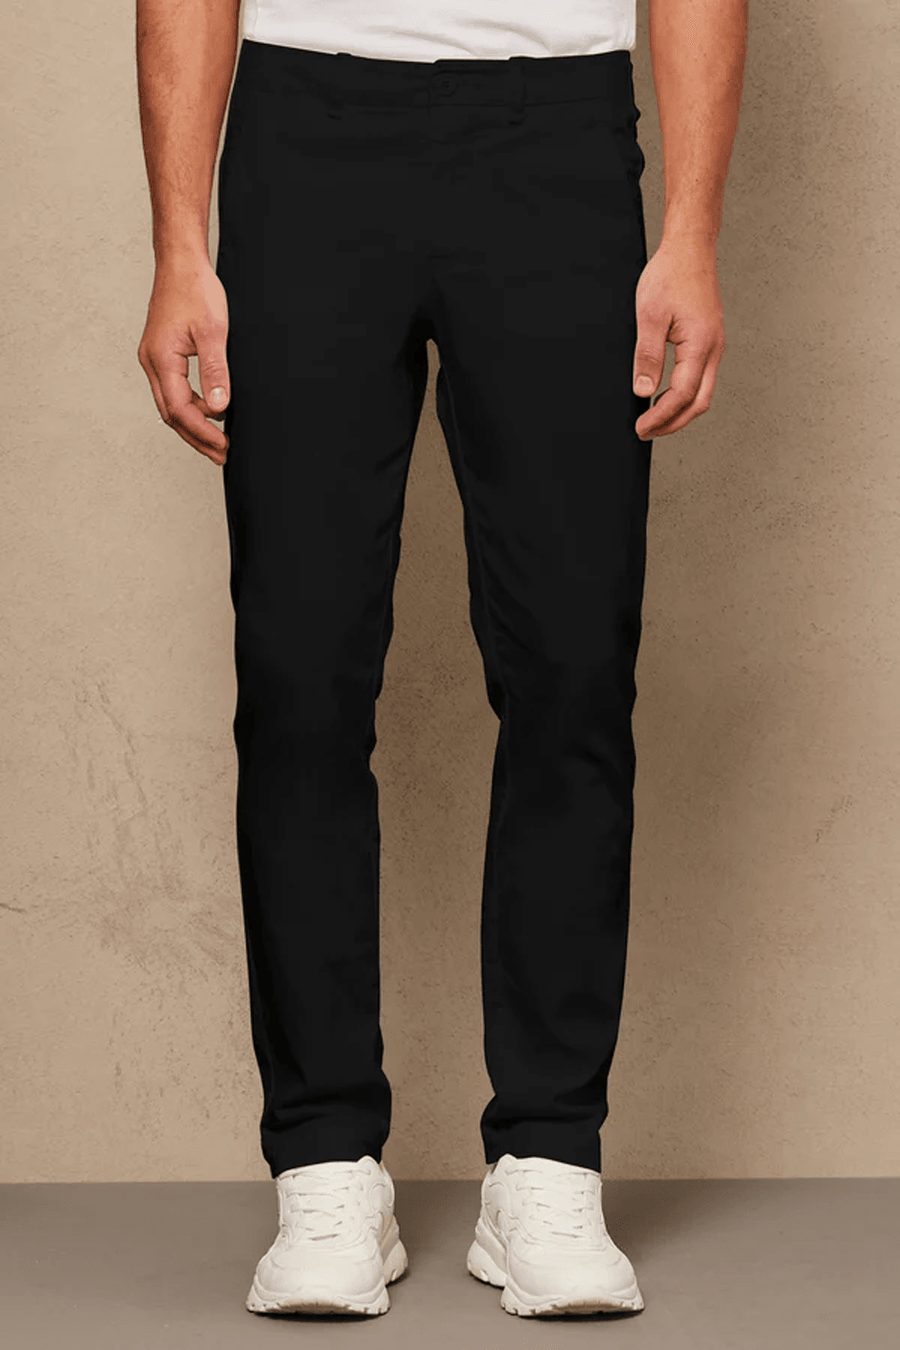 Buy the Transit Soft Cotton Chinos in Black at Intro. Spend £50 for free UK delivery. Official stockists. We ship worldwide.